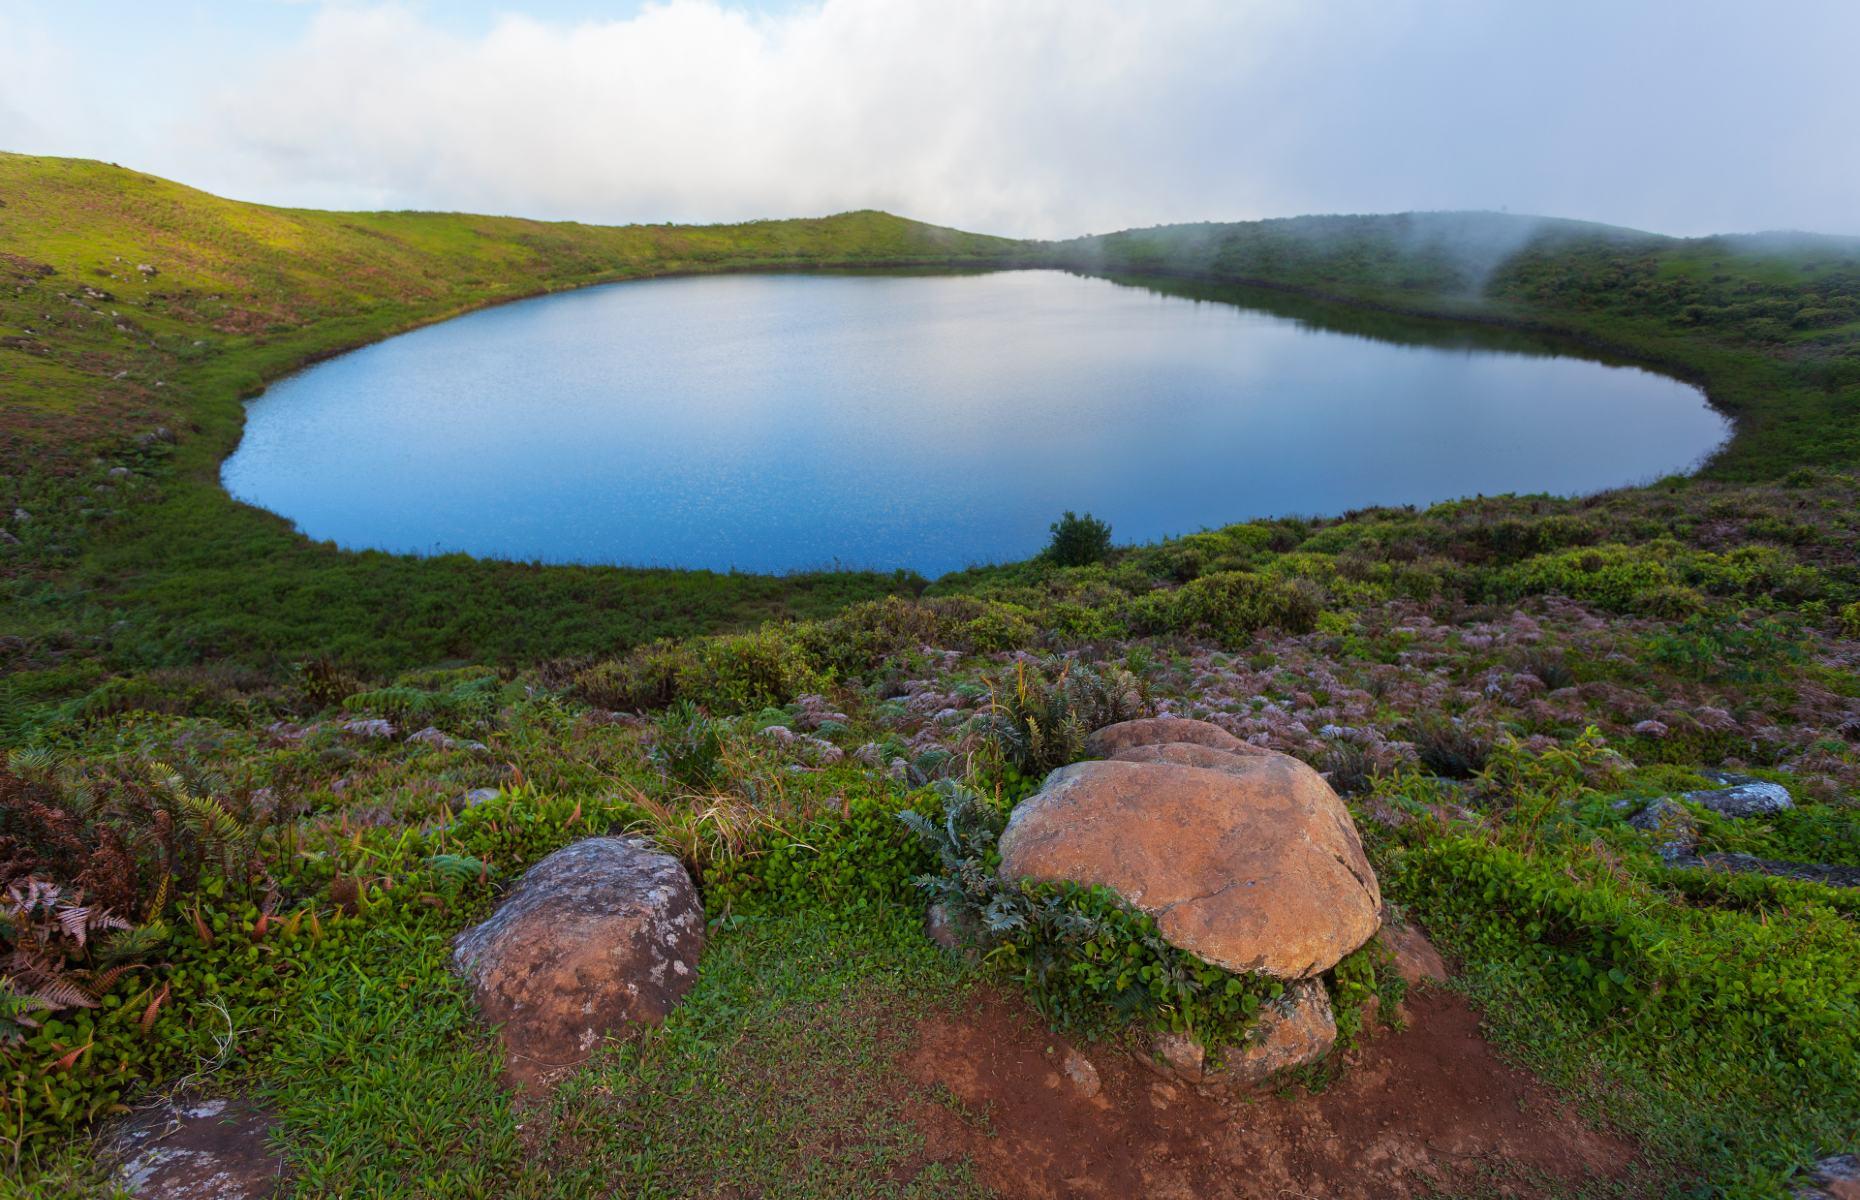 Sitting in the caldera of a collapsed volcano at some 2,297 feet (700m) above sea level, the El Junco lagoon is one of the island’s high points in more ways than one. It’s one of the only bodies of freshwater in the Galápagos and it’s surrounded by wildlife, notably birds: white-cheeked pintails, frigate birds and endangered Chatham mockingbirds can all be spotted here.